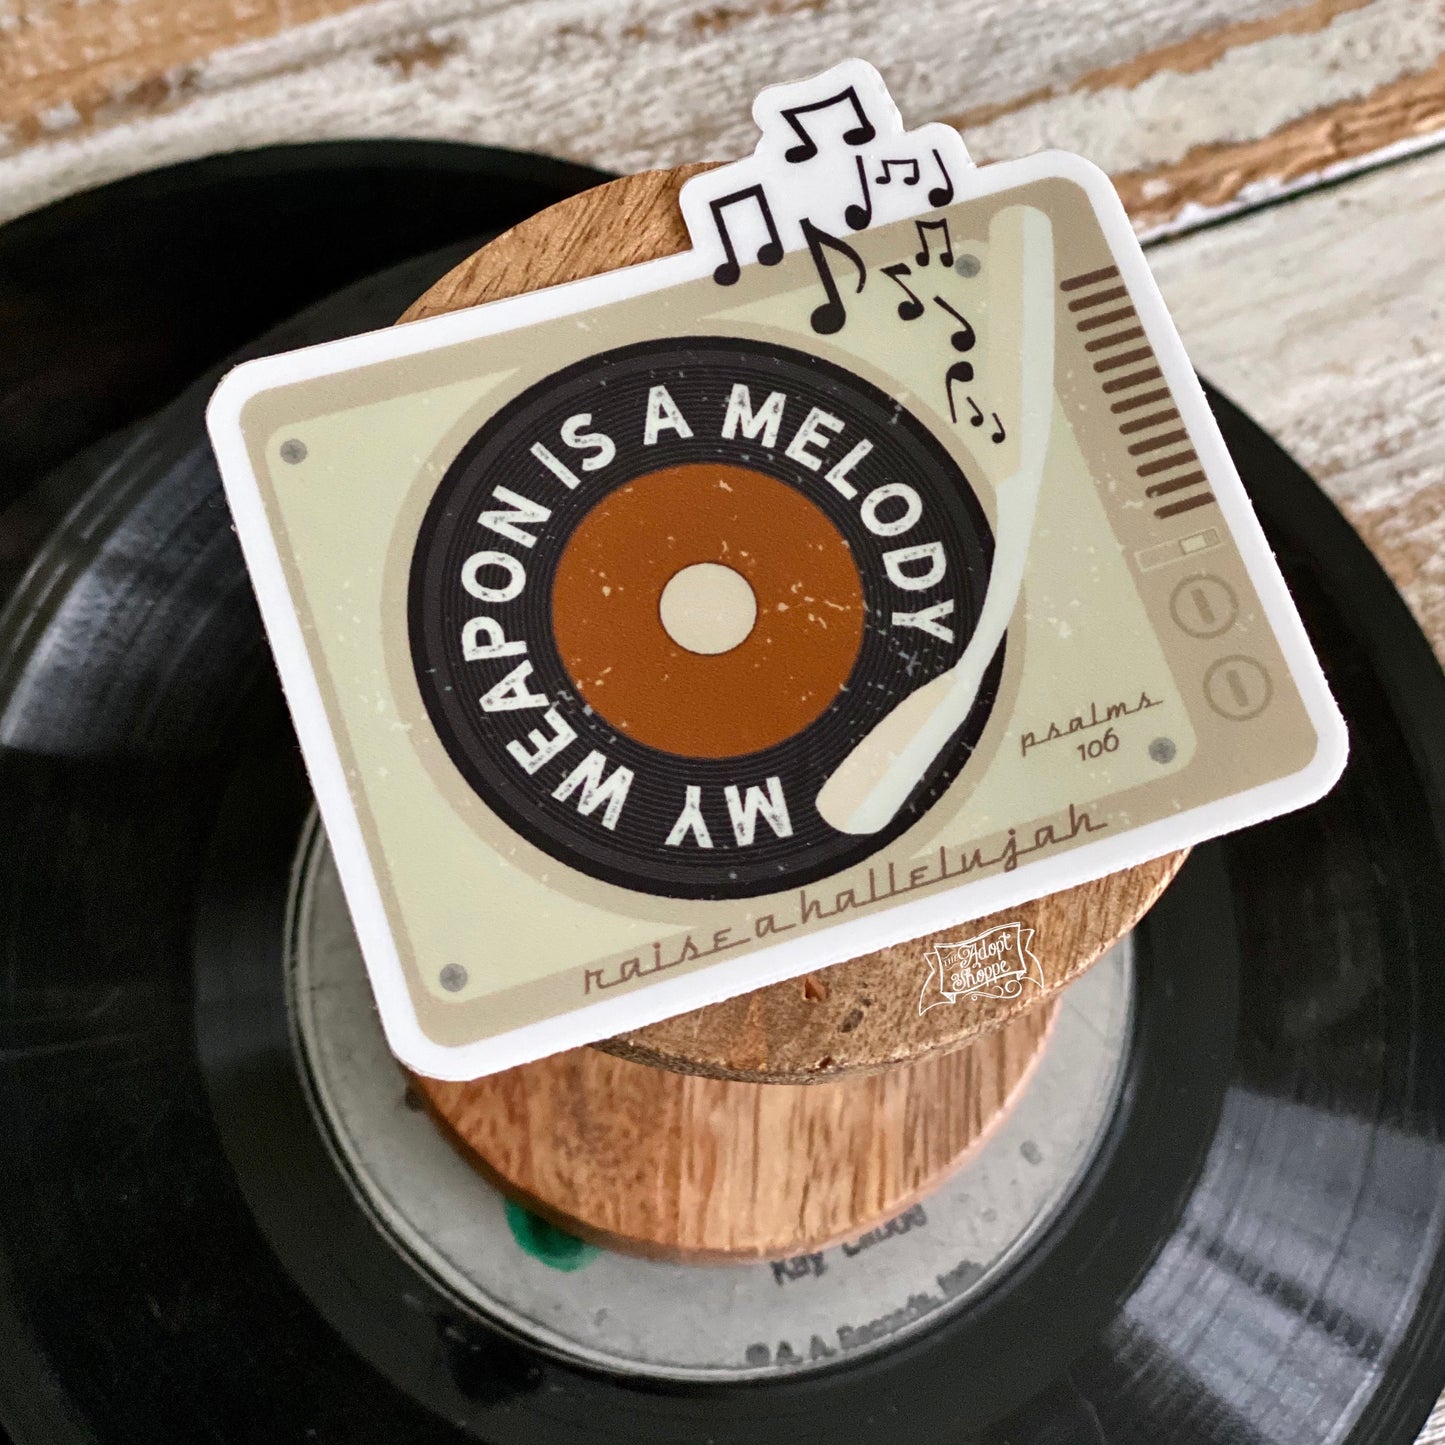 my weapon is a melody raise a hallelujah vintage record player (Psalms 106) sticker